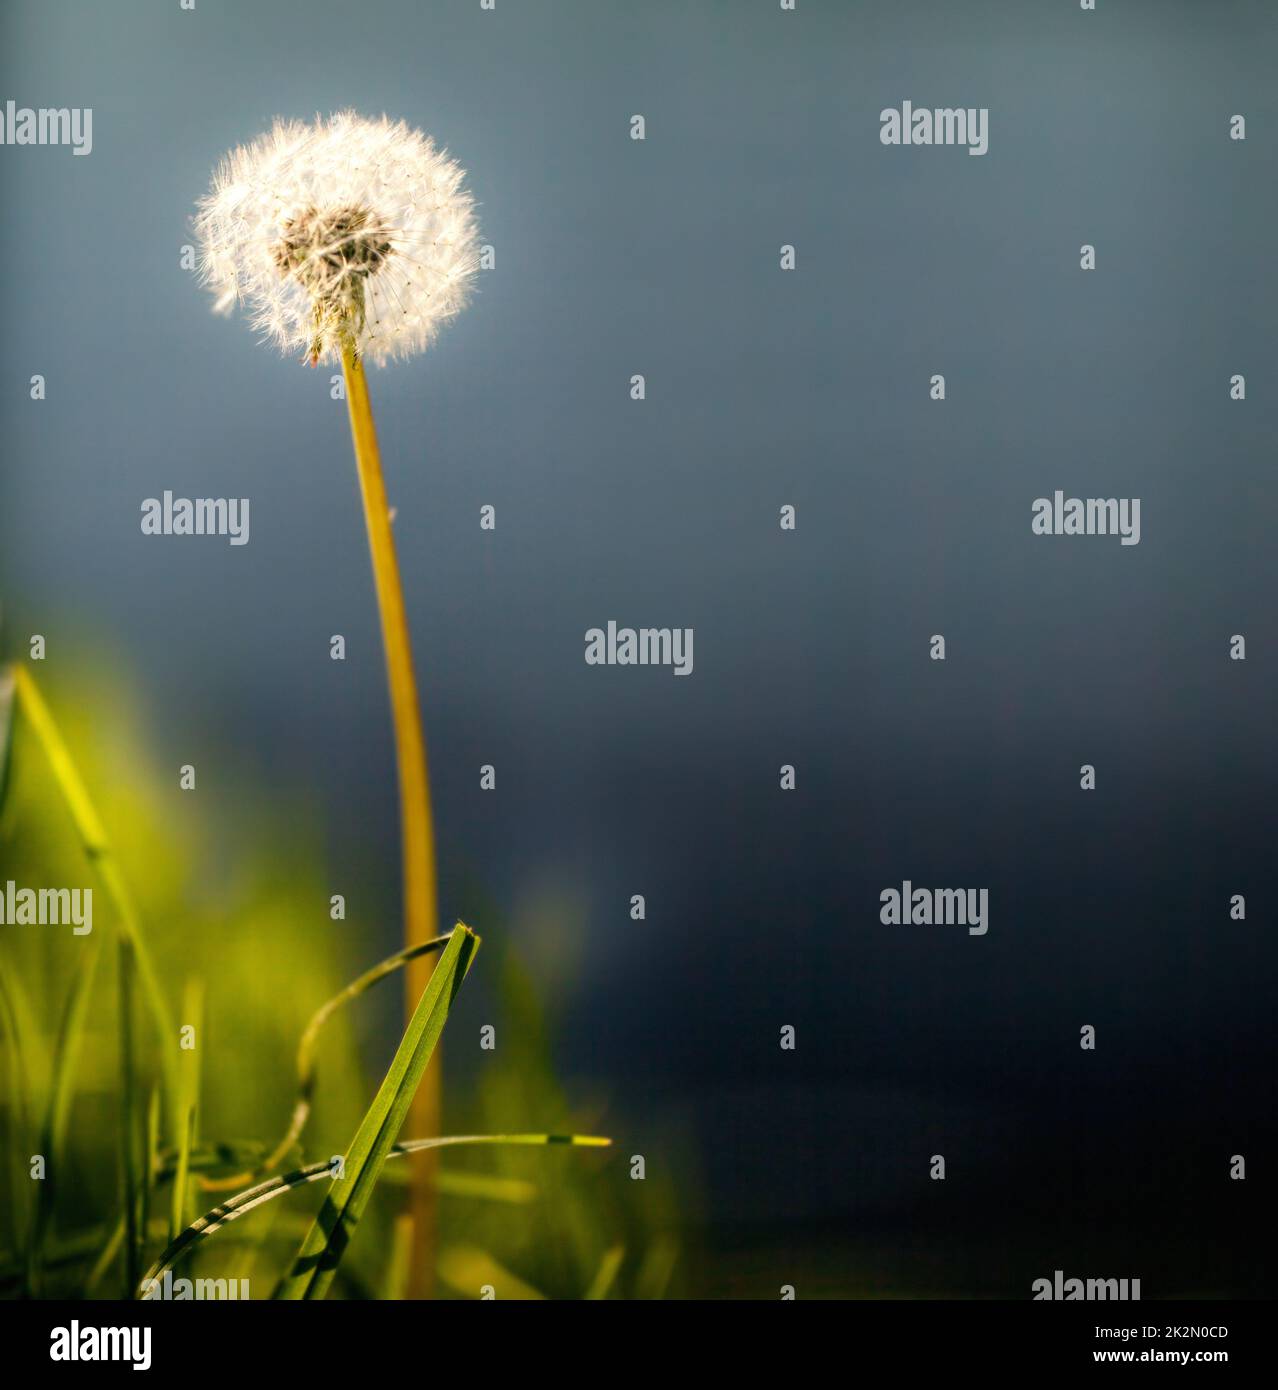 Your future is a wish away. A Dandelion ready to release its parachutes. Stock Photo